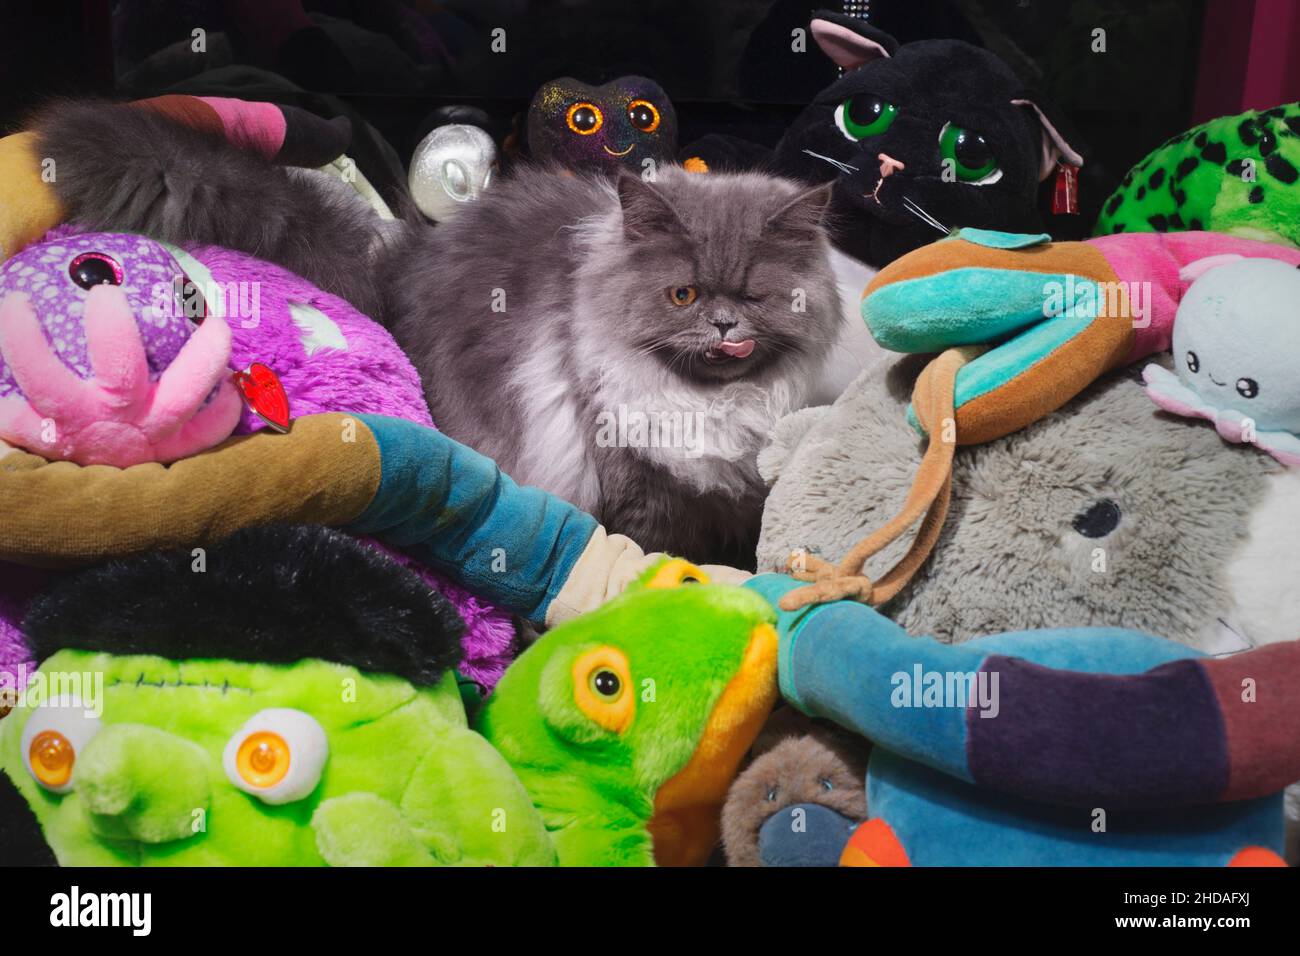 Cute fluffy grey cat with his tongue out, sitting in a pile of stuffed animals. Stock Photo